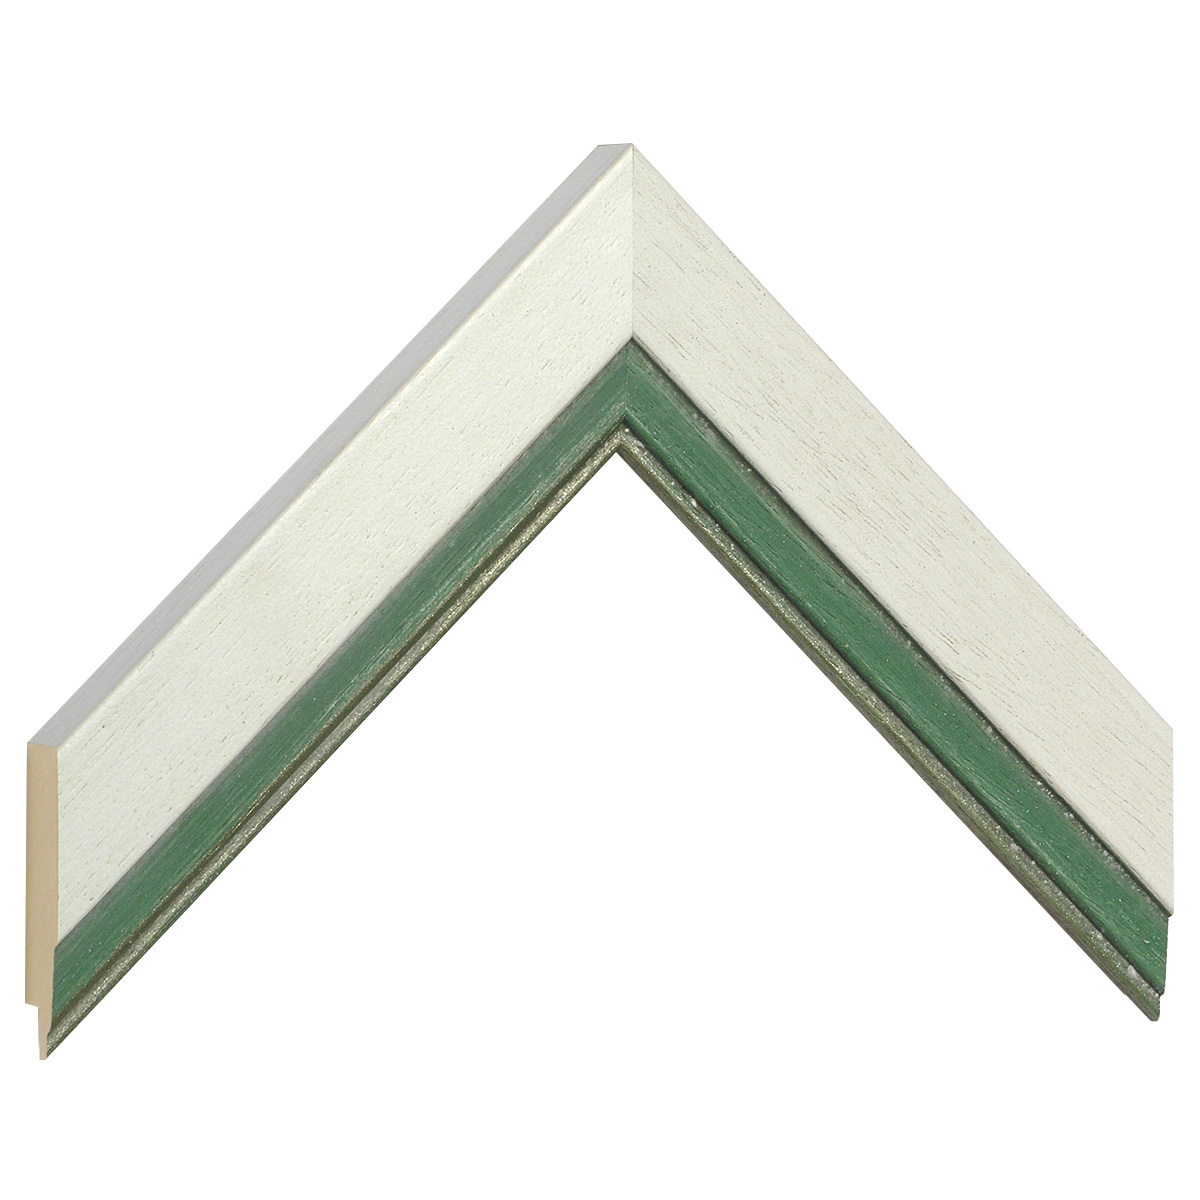 Moulding ayous 39mm width - cream with green edge - Sample